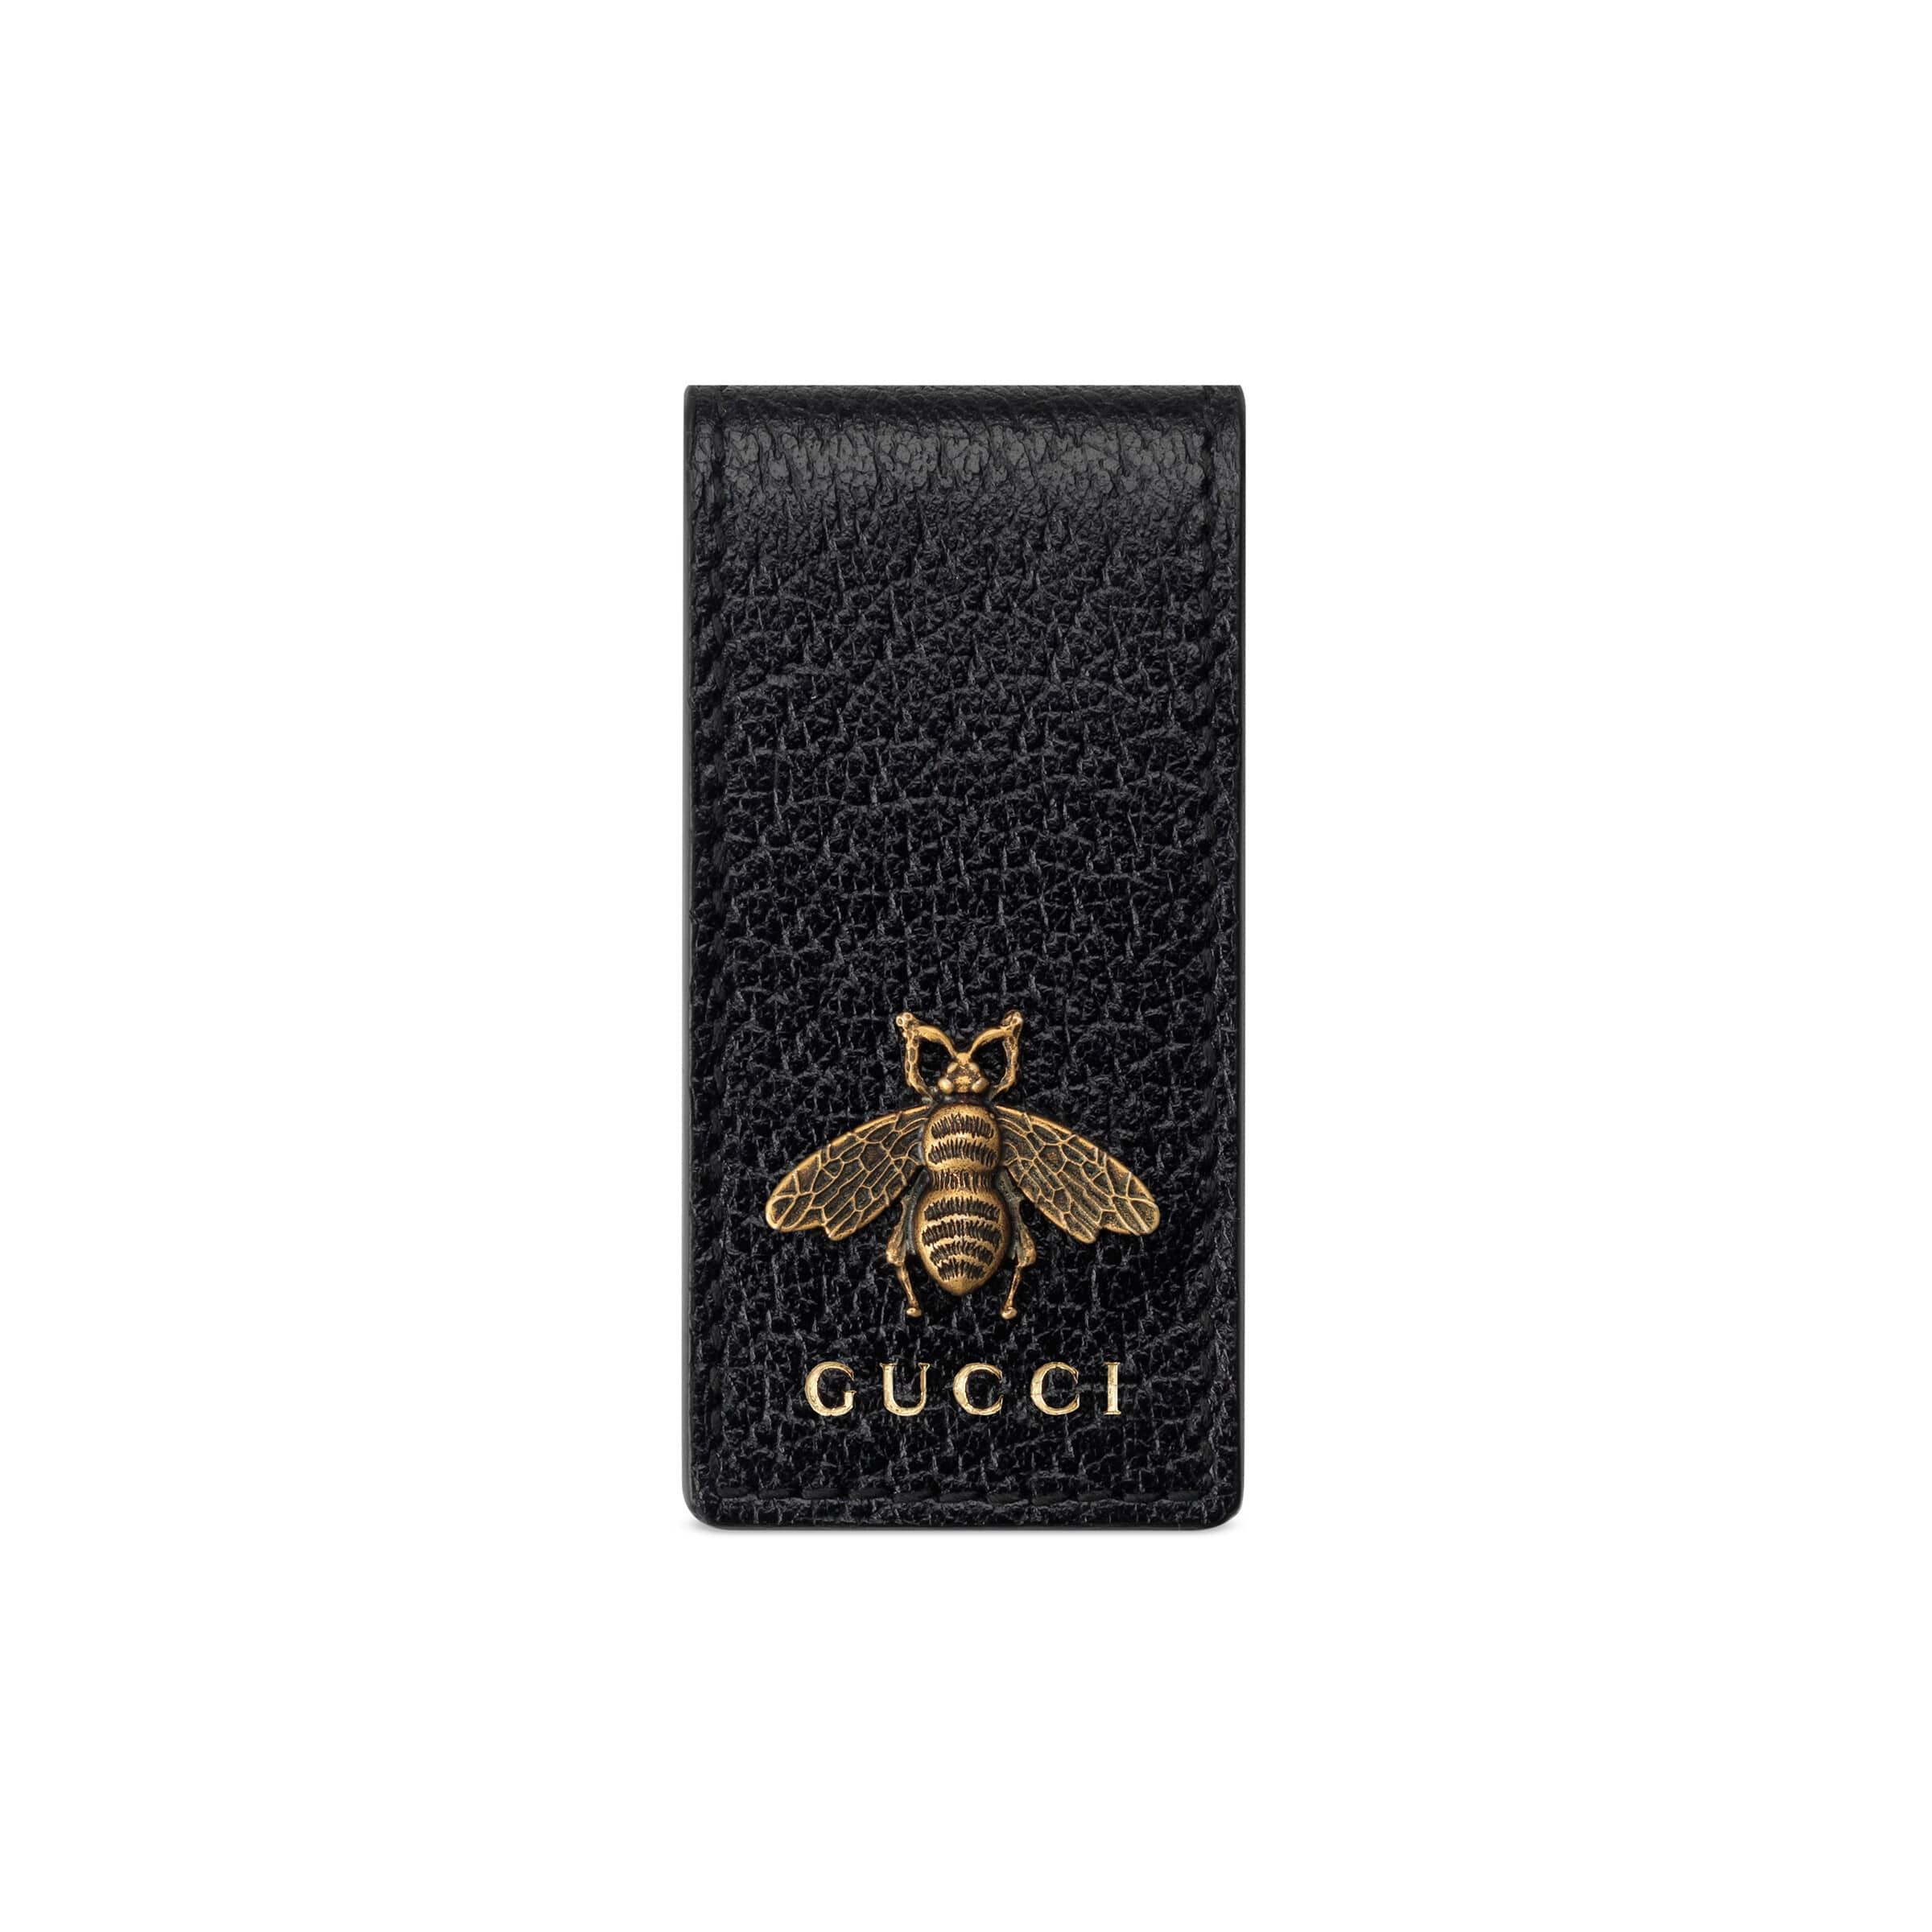 Gucci Bee Motif Money Clip Wallet in Black for Men - Save 15% | Lyst